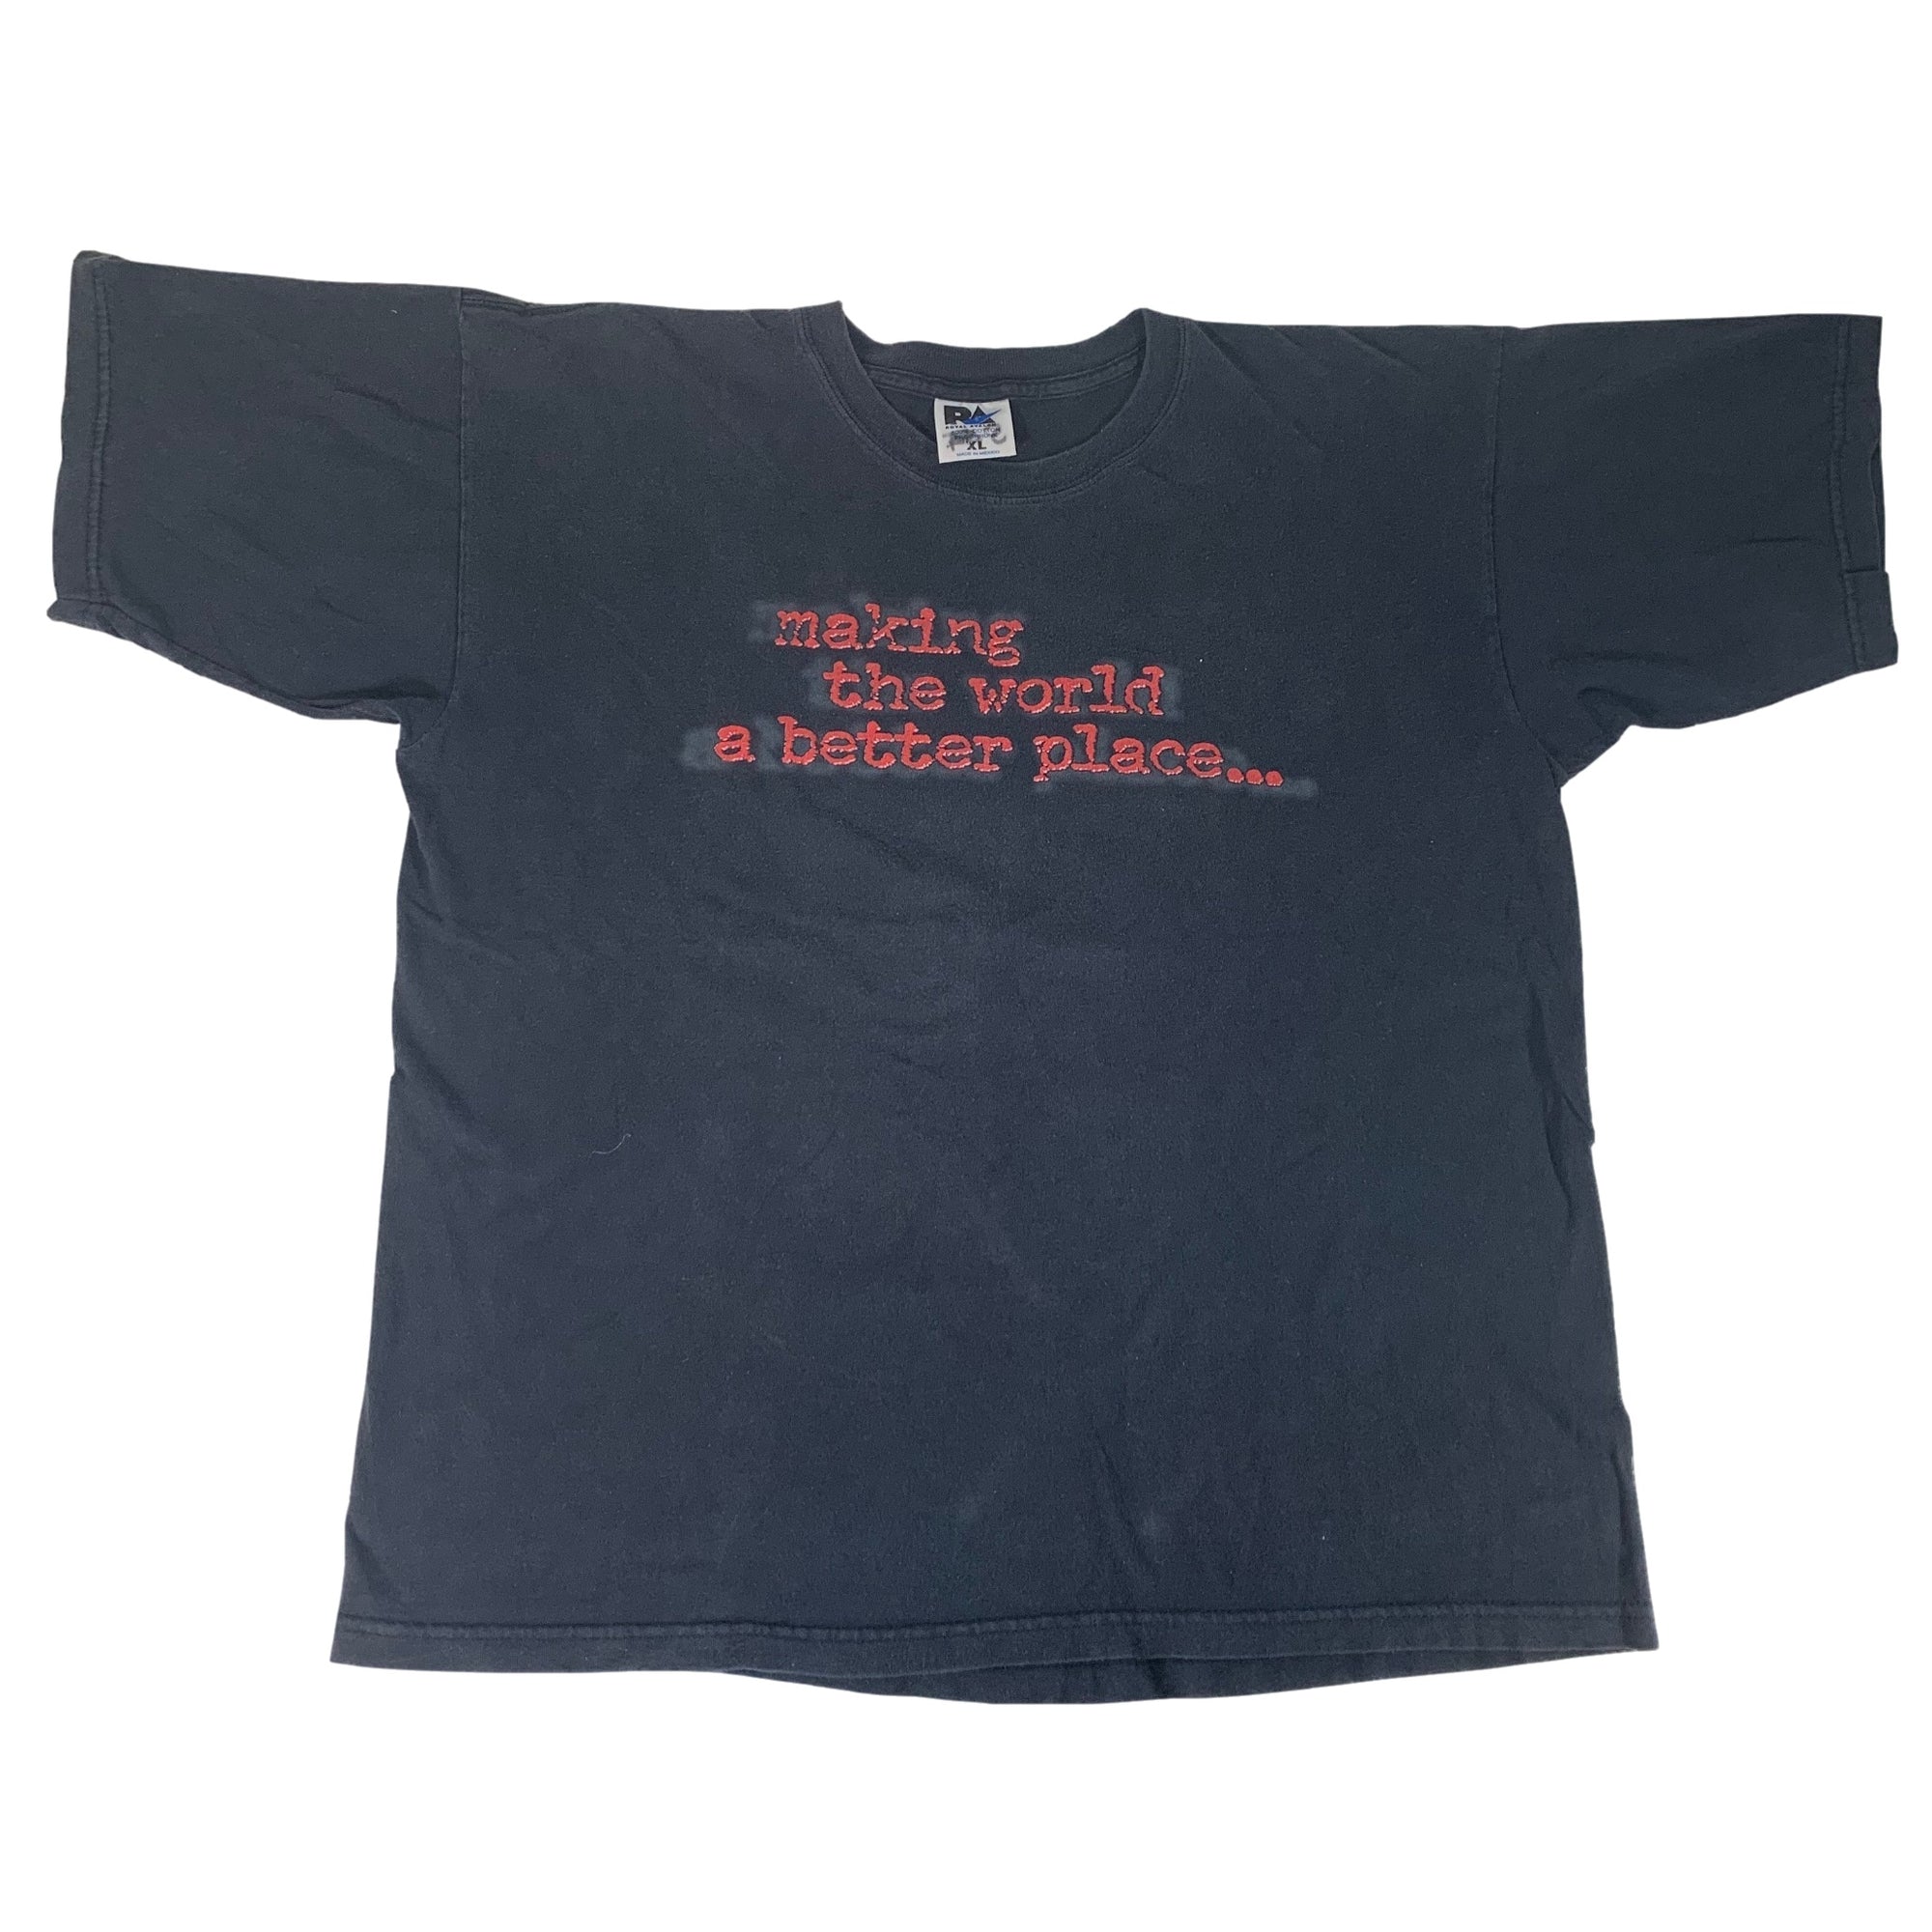 Vintage Mankind "Making The World A Better Place" T-Shirt - jointcustodydc